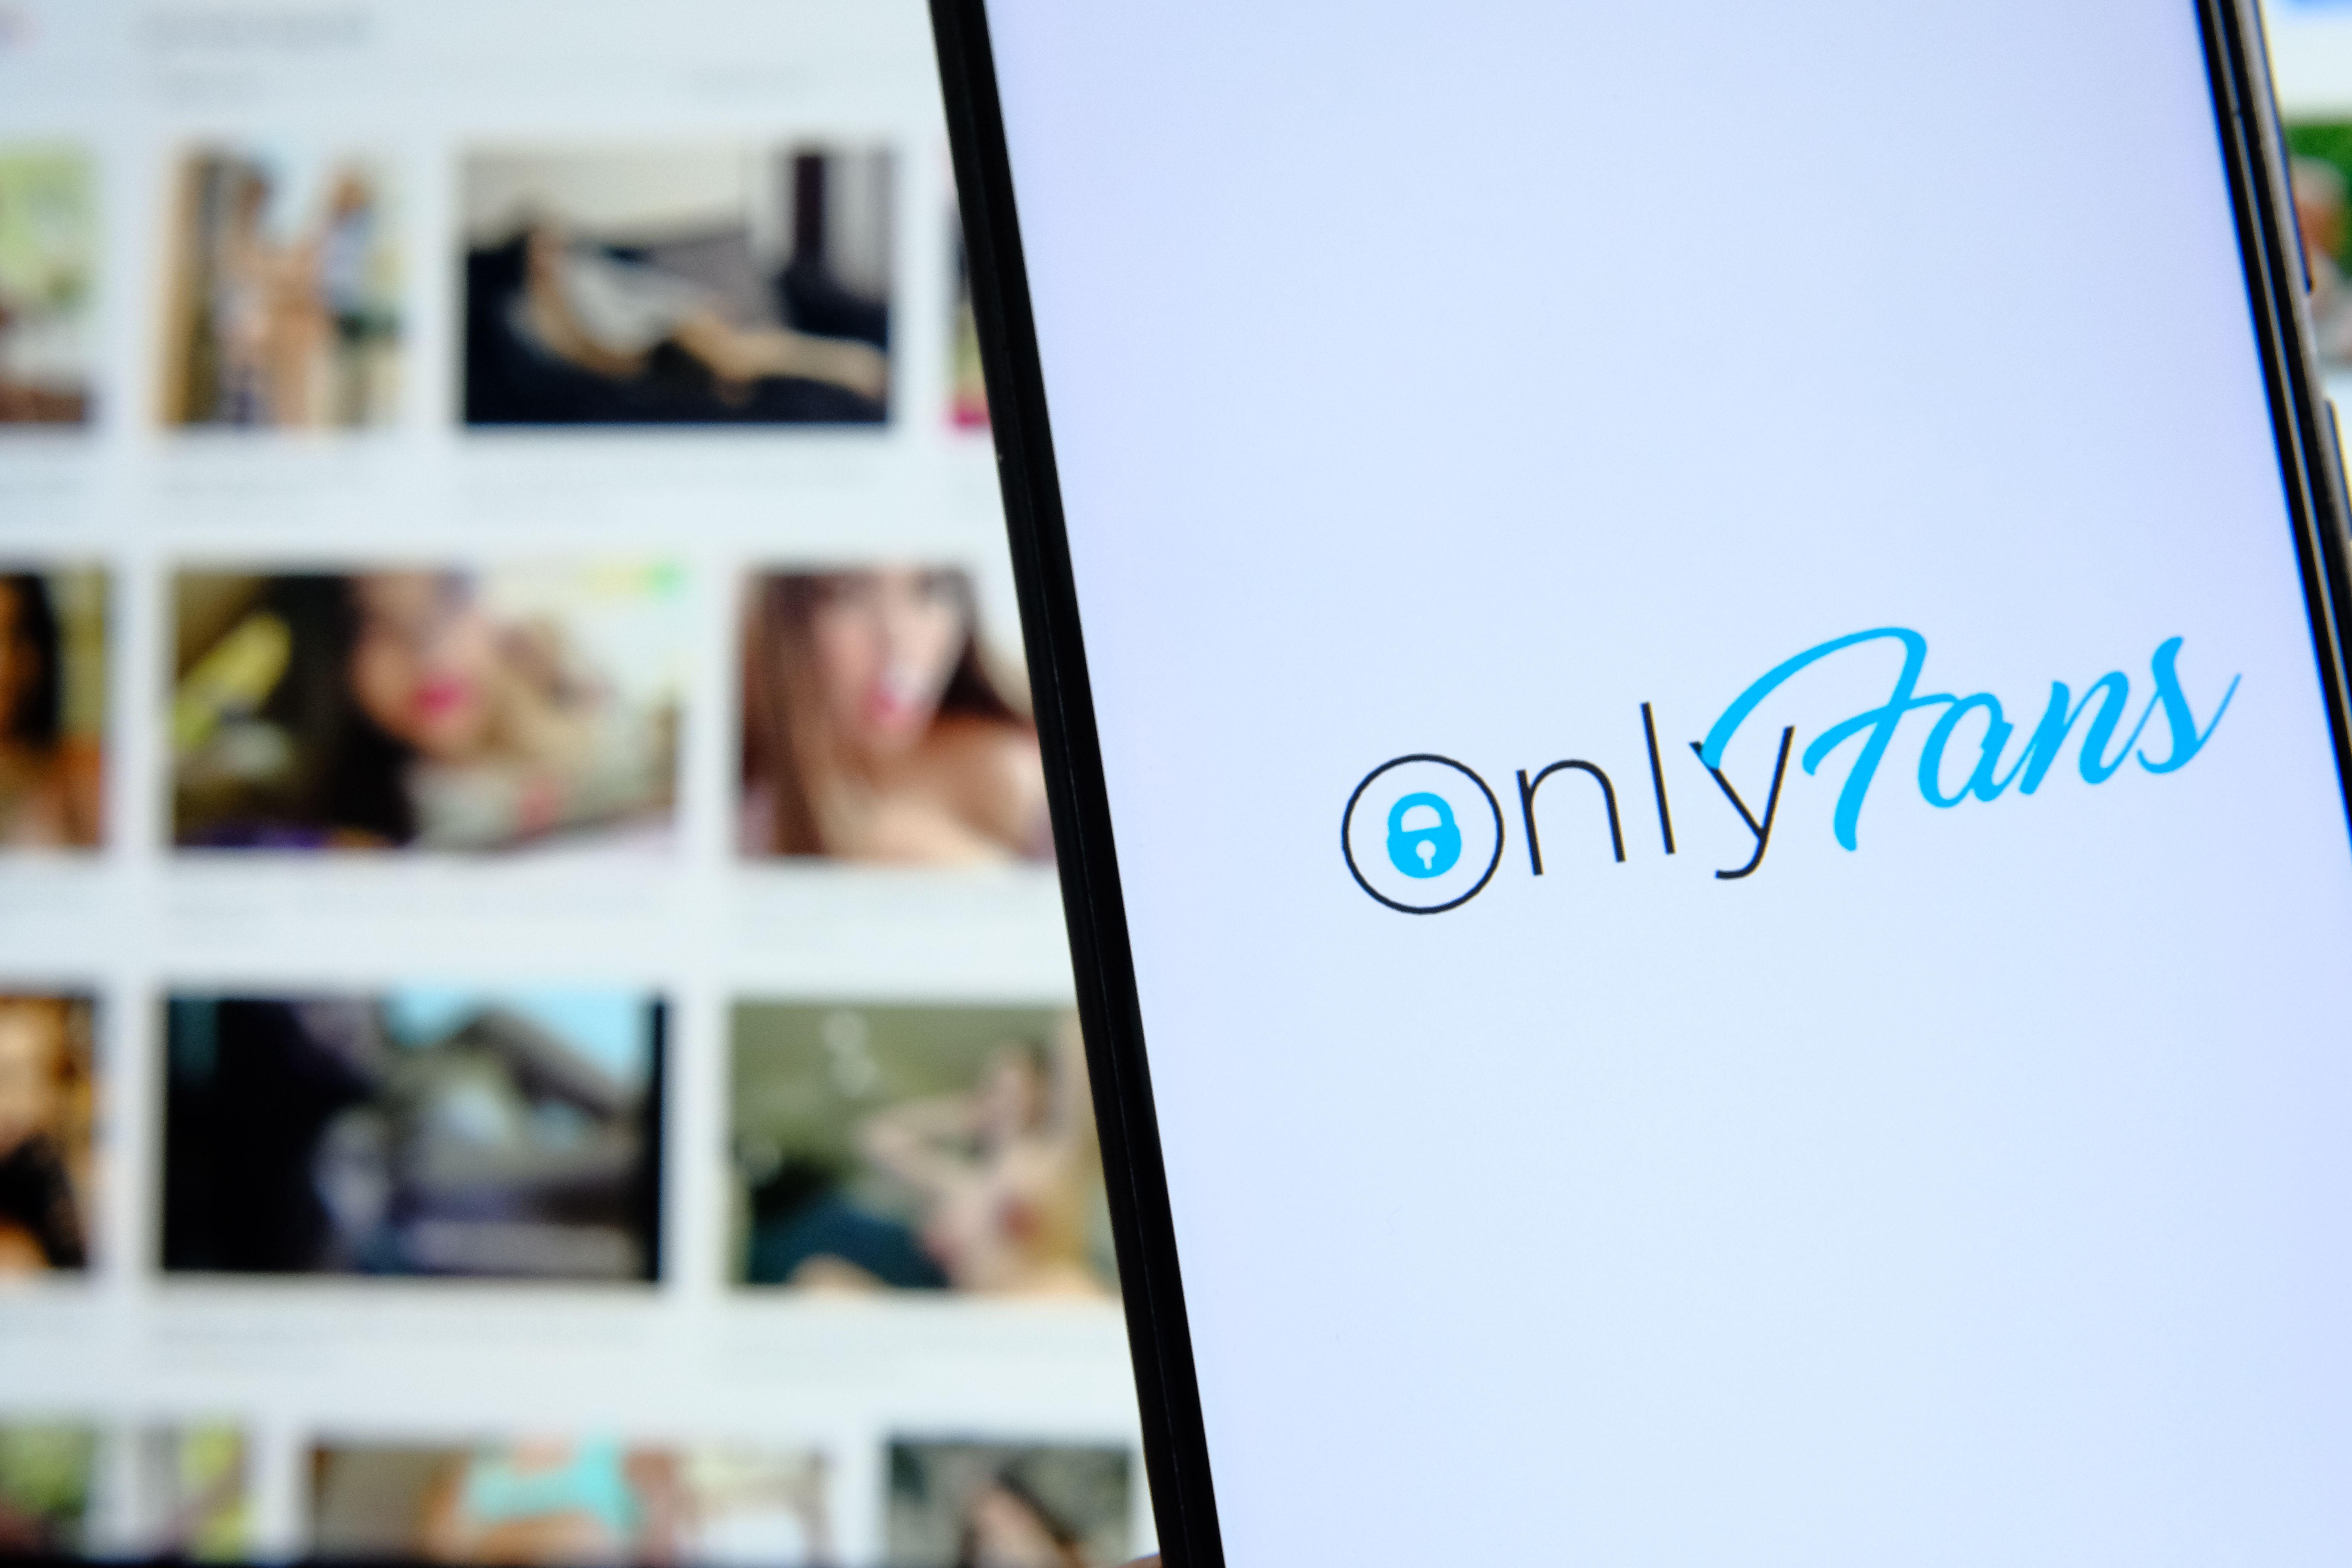 Onlyfans platform logo seen on smartphone and blurred pictures of unrecognisable girls on the background laptop